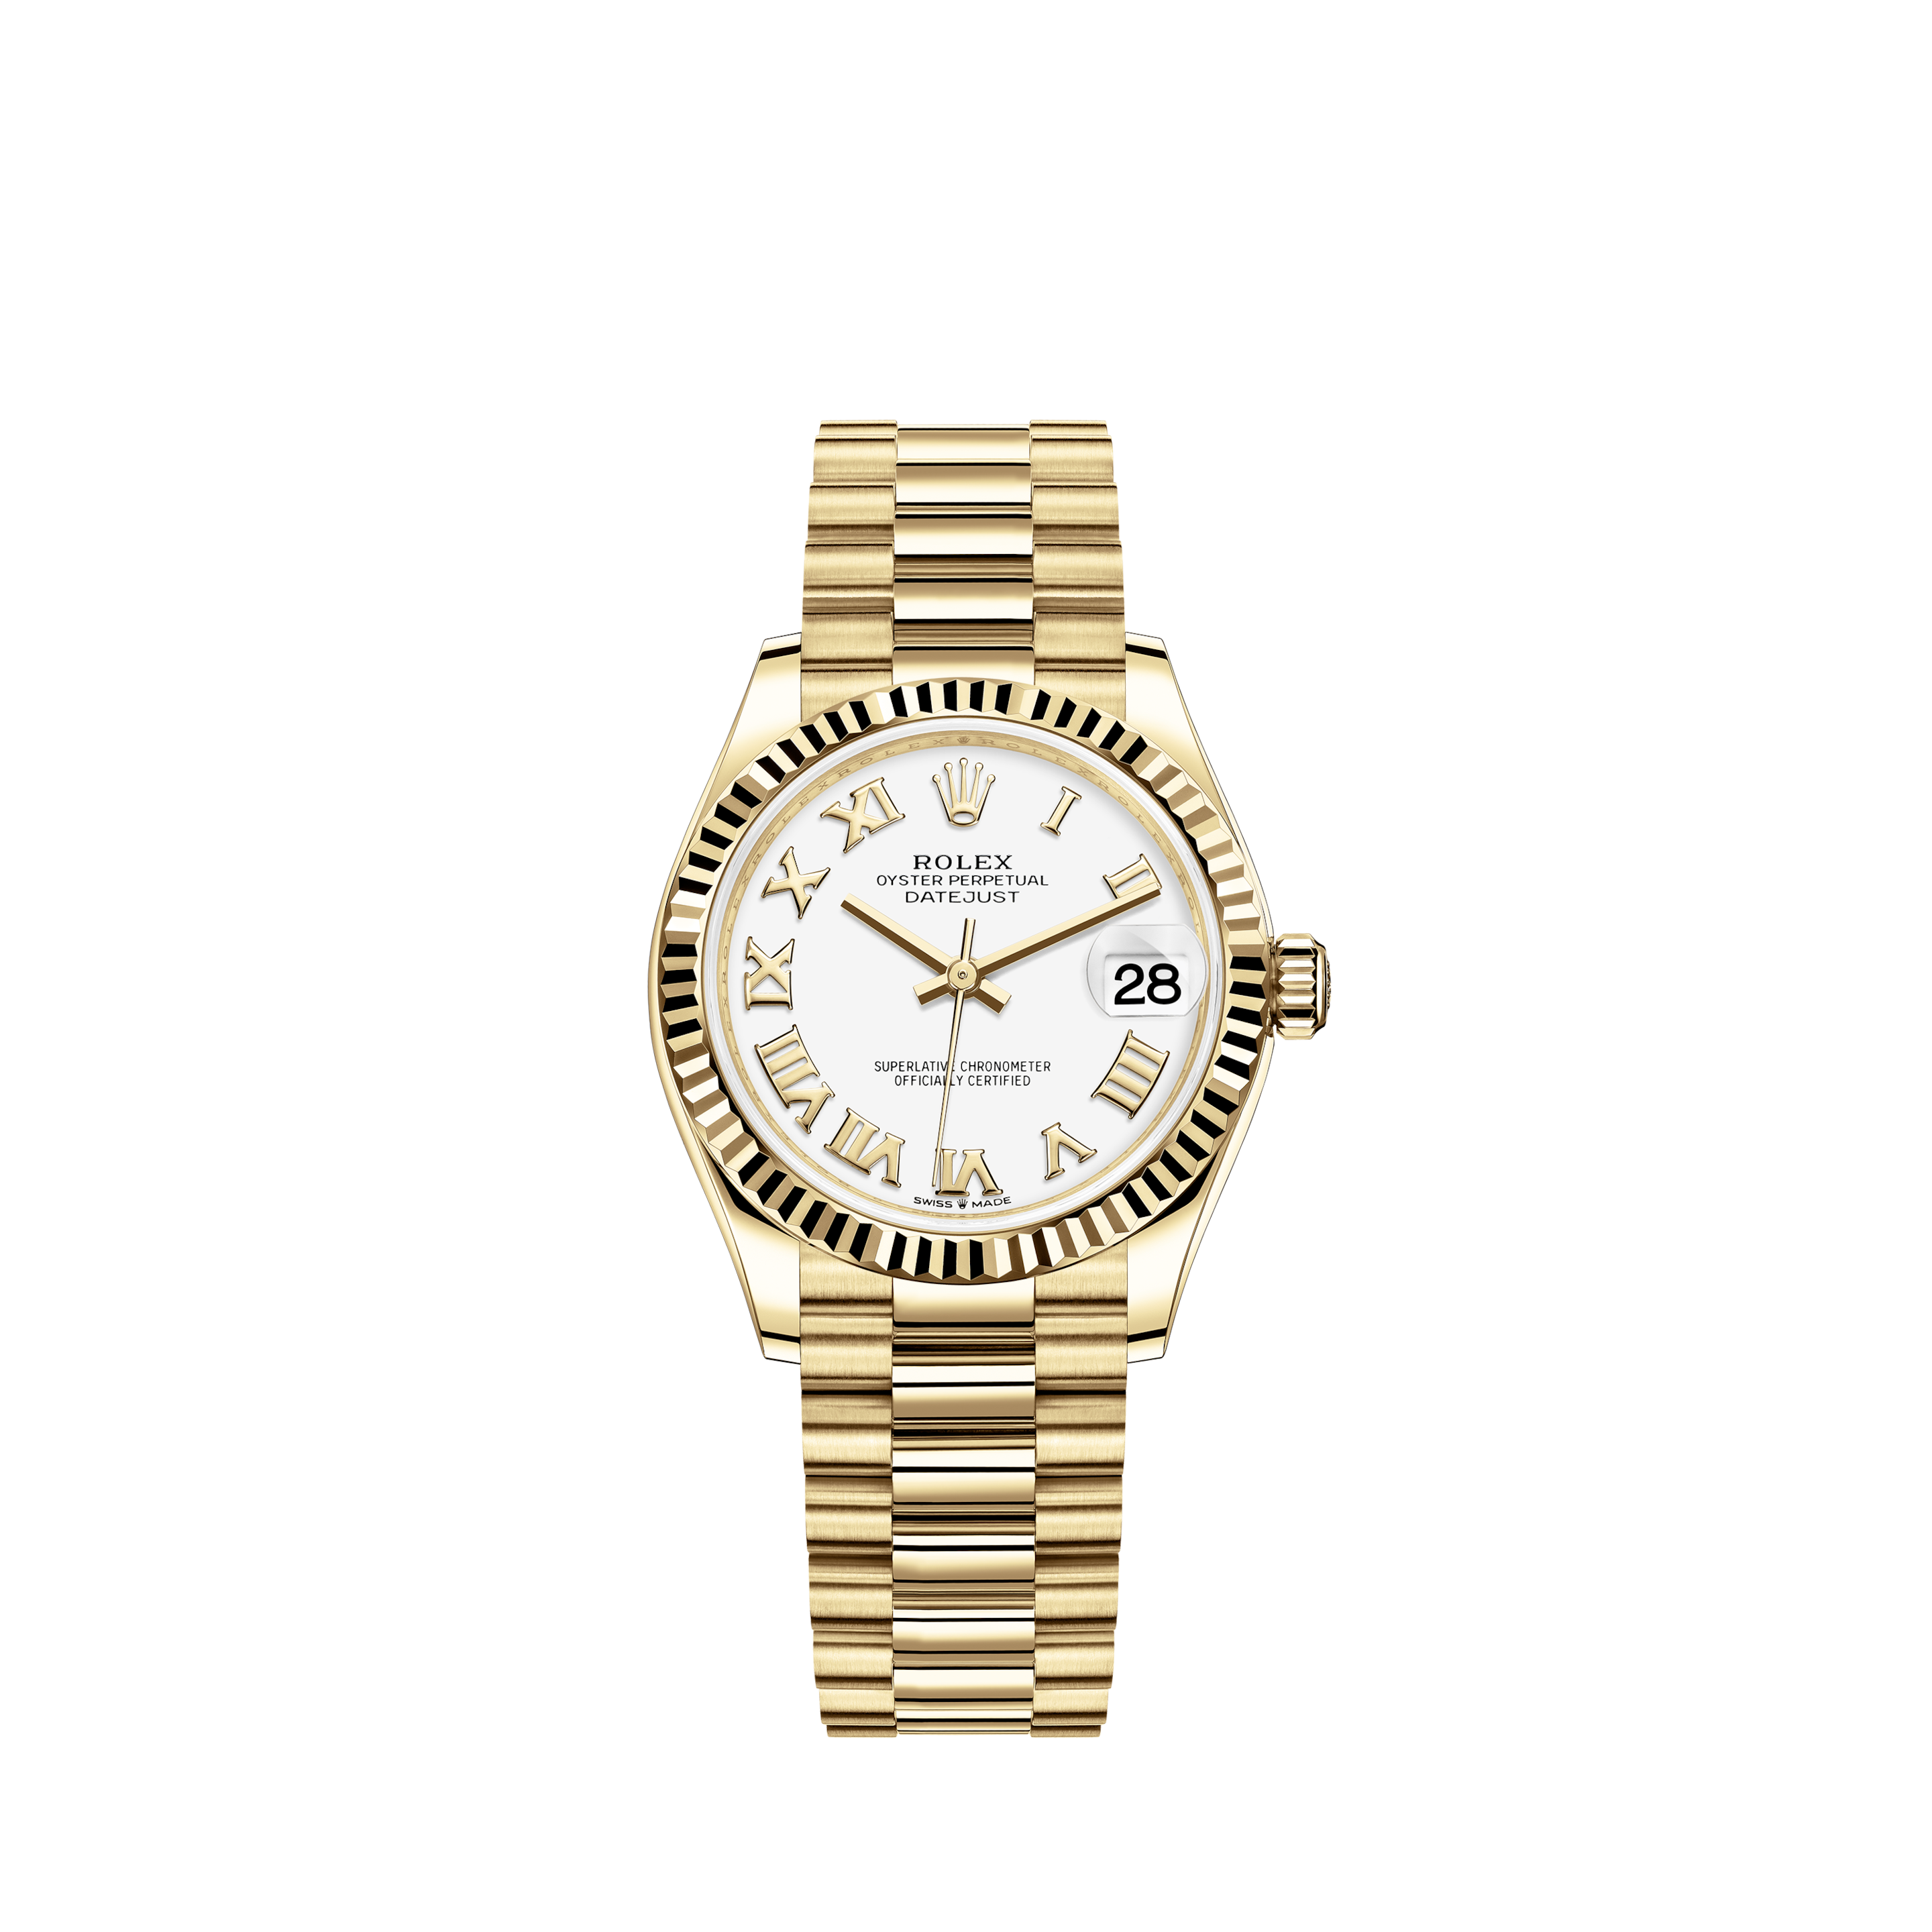 Rolex Datejust 28mm Steel & Yellow Gold White Roman Dial Oyster Bracelet